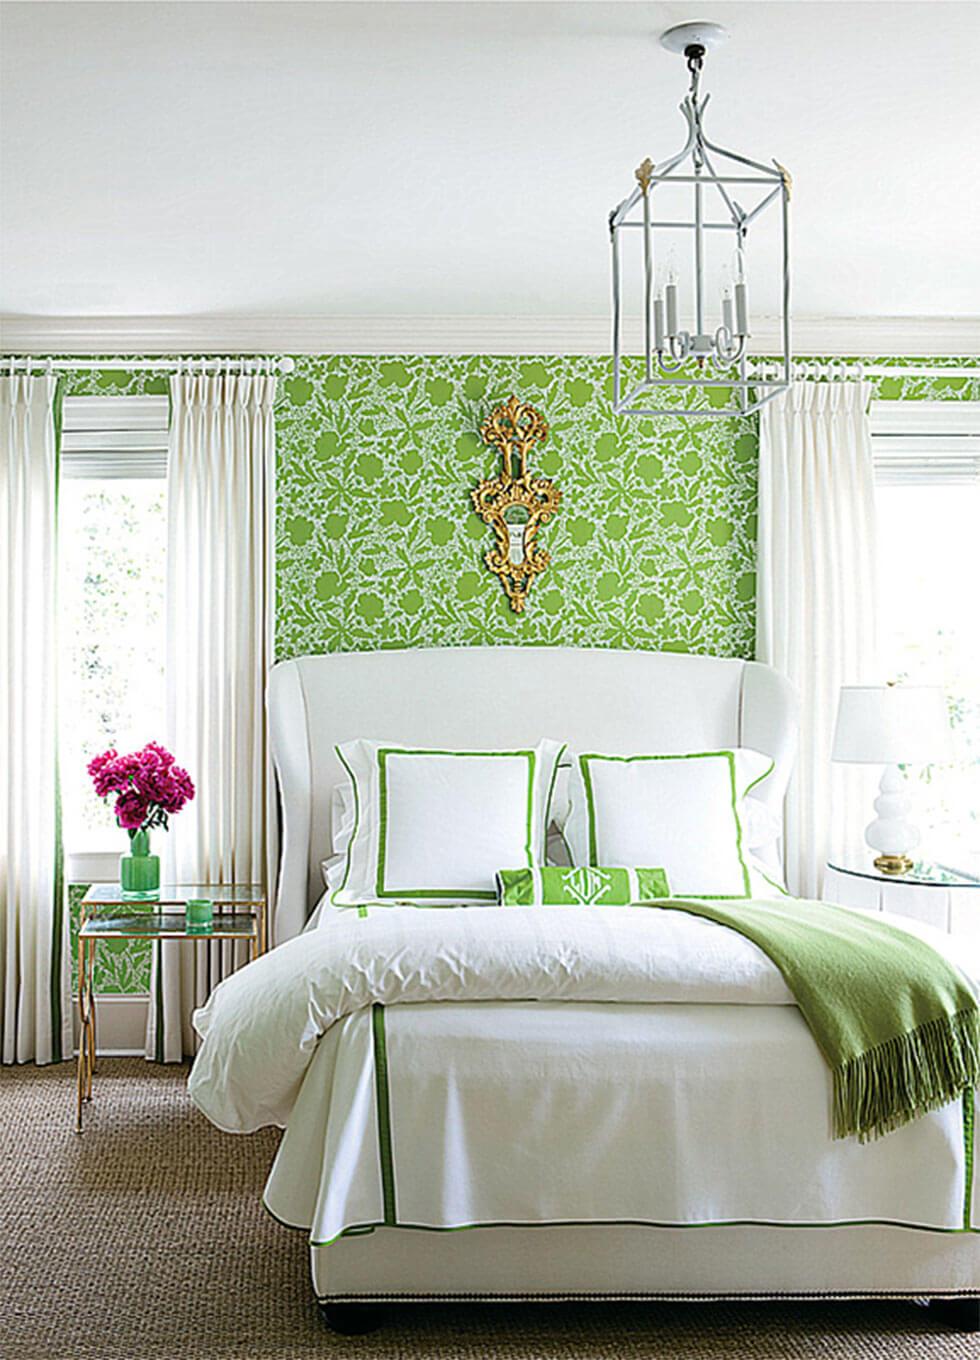 Lime green bedroom with cosy white bedding in a classic mid-century style.